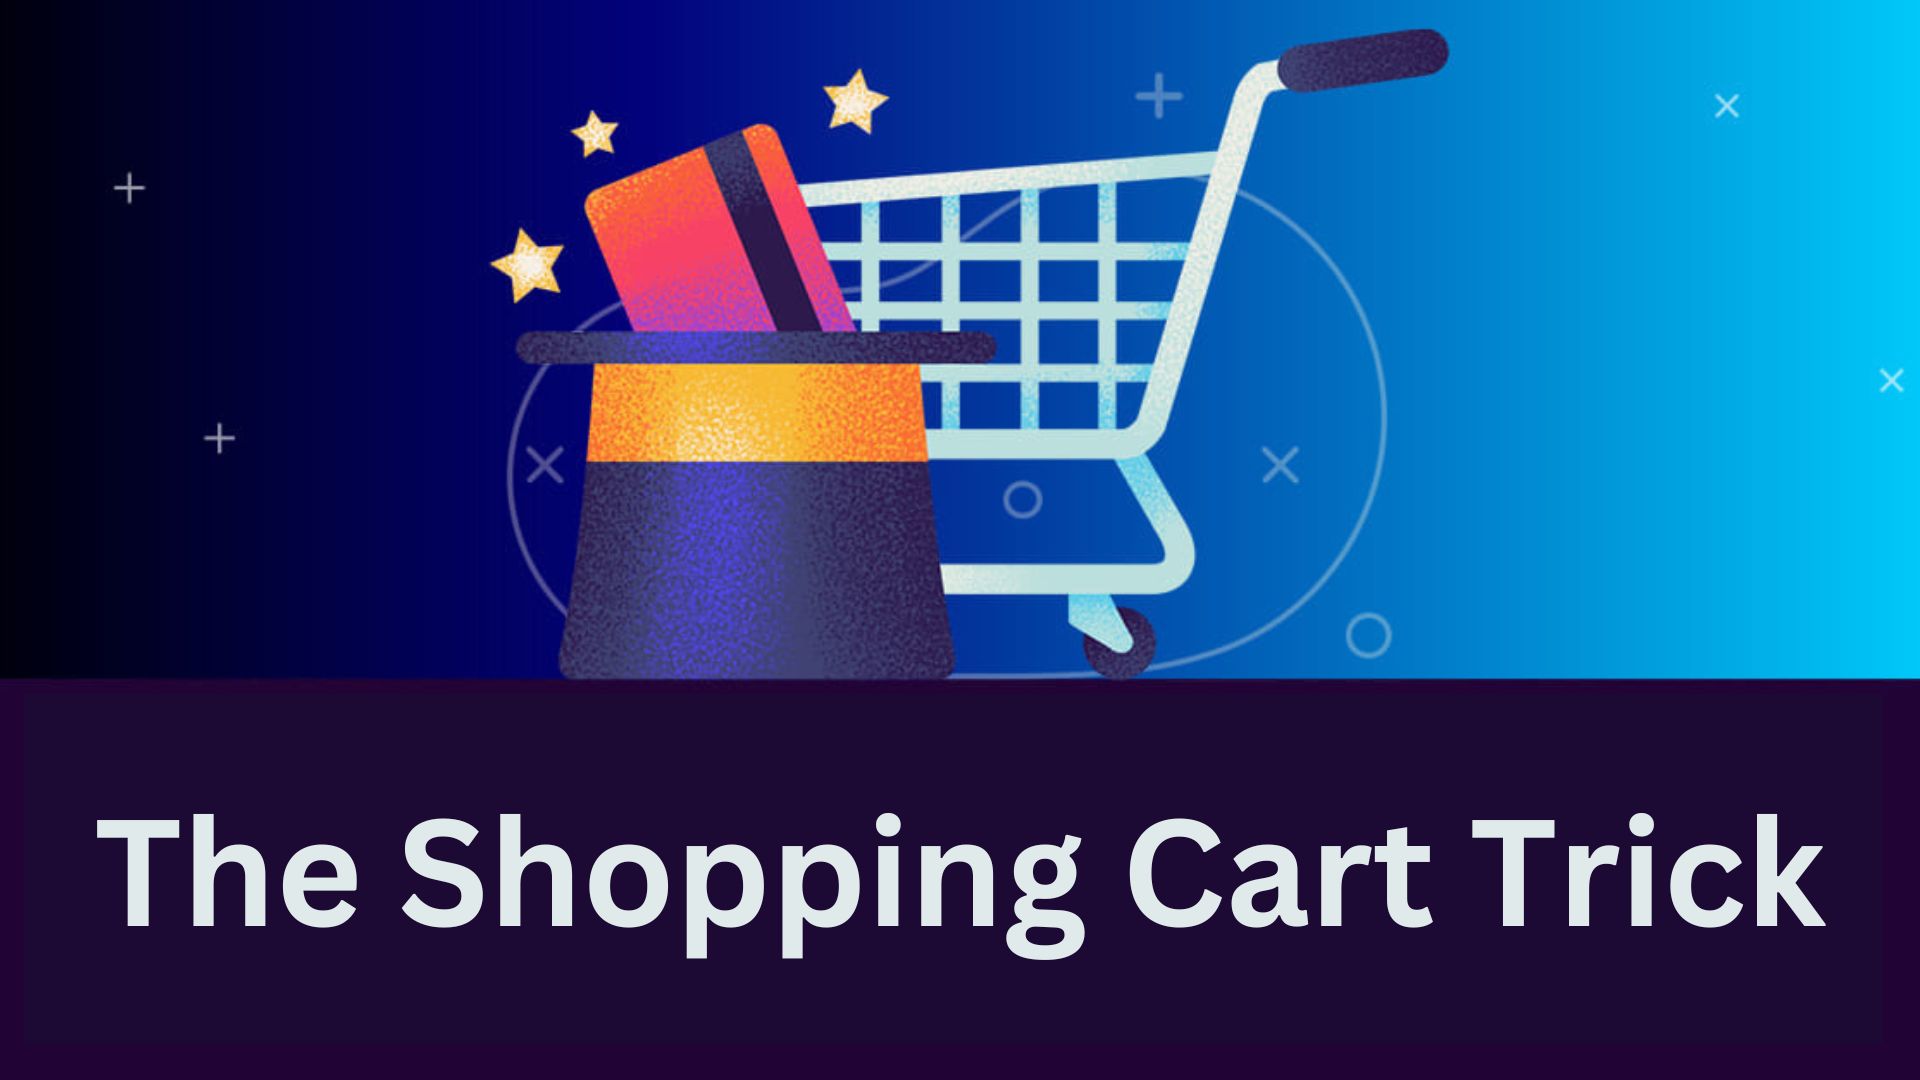 The Shopping Cart Trick